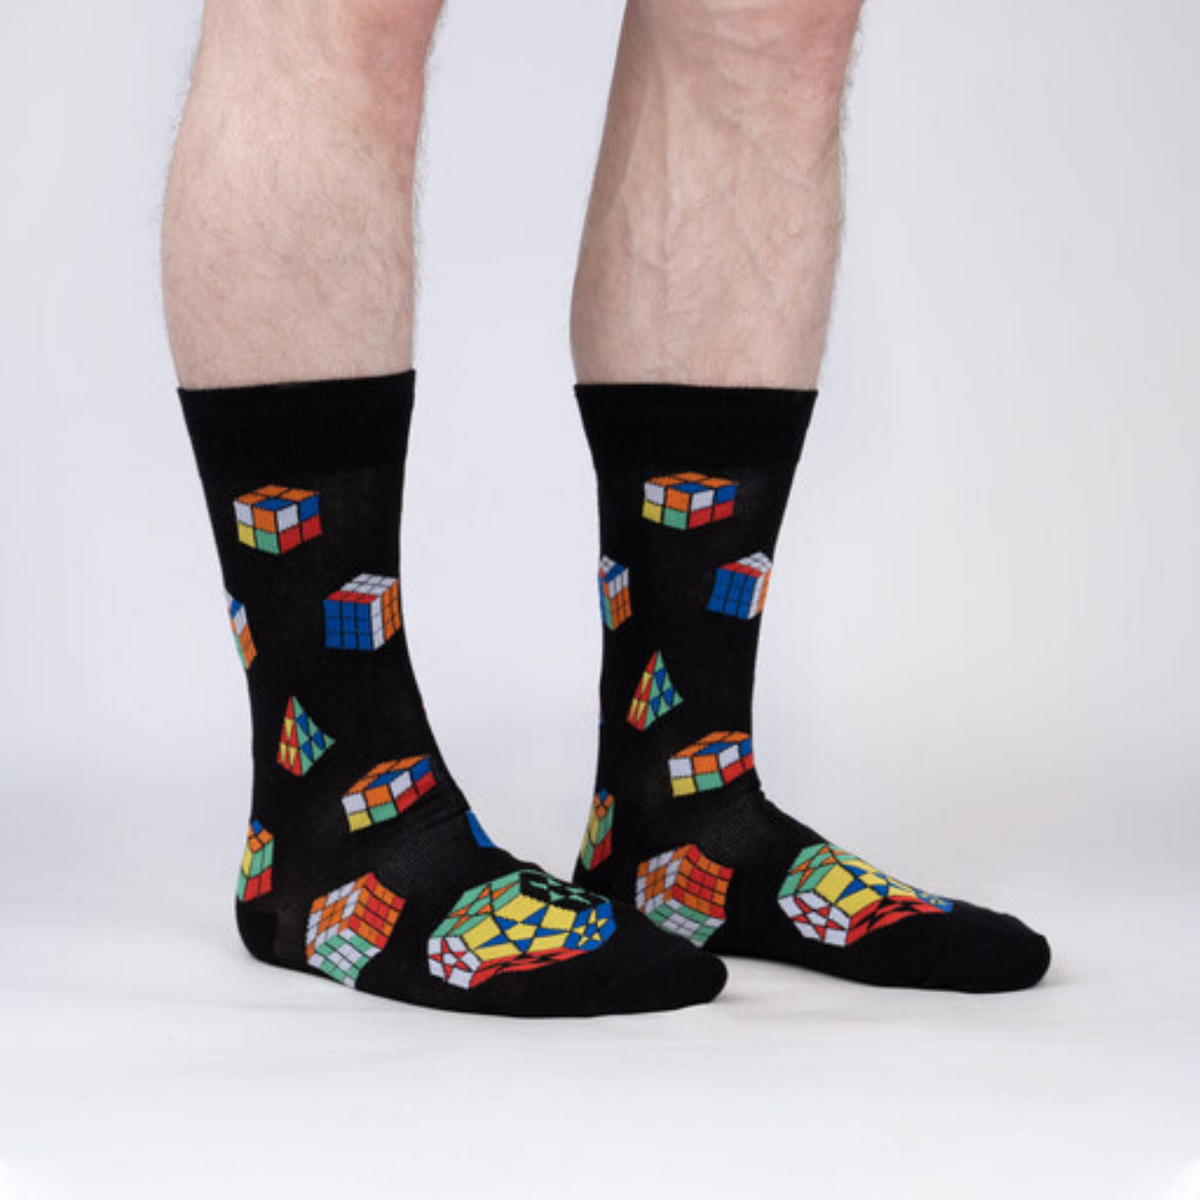 Sock It To Me Puzzle Box men&#39;s sock featuring black sock with cube color match puzzle game worn by model from side